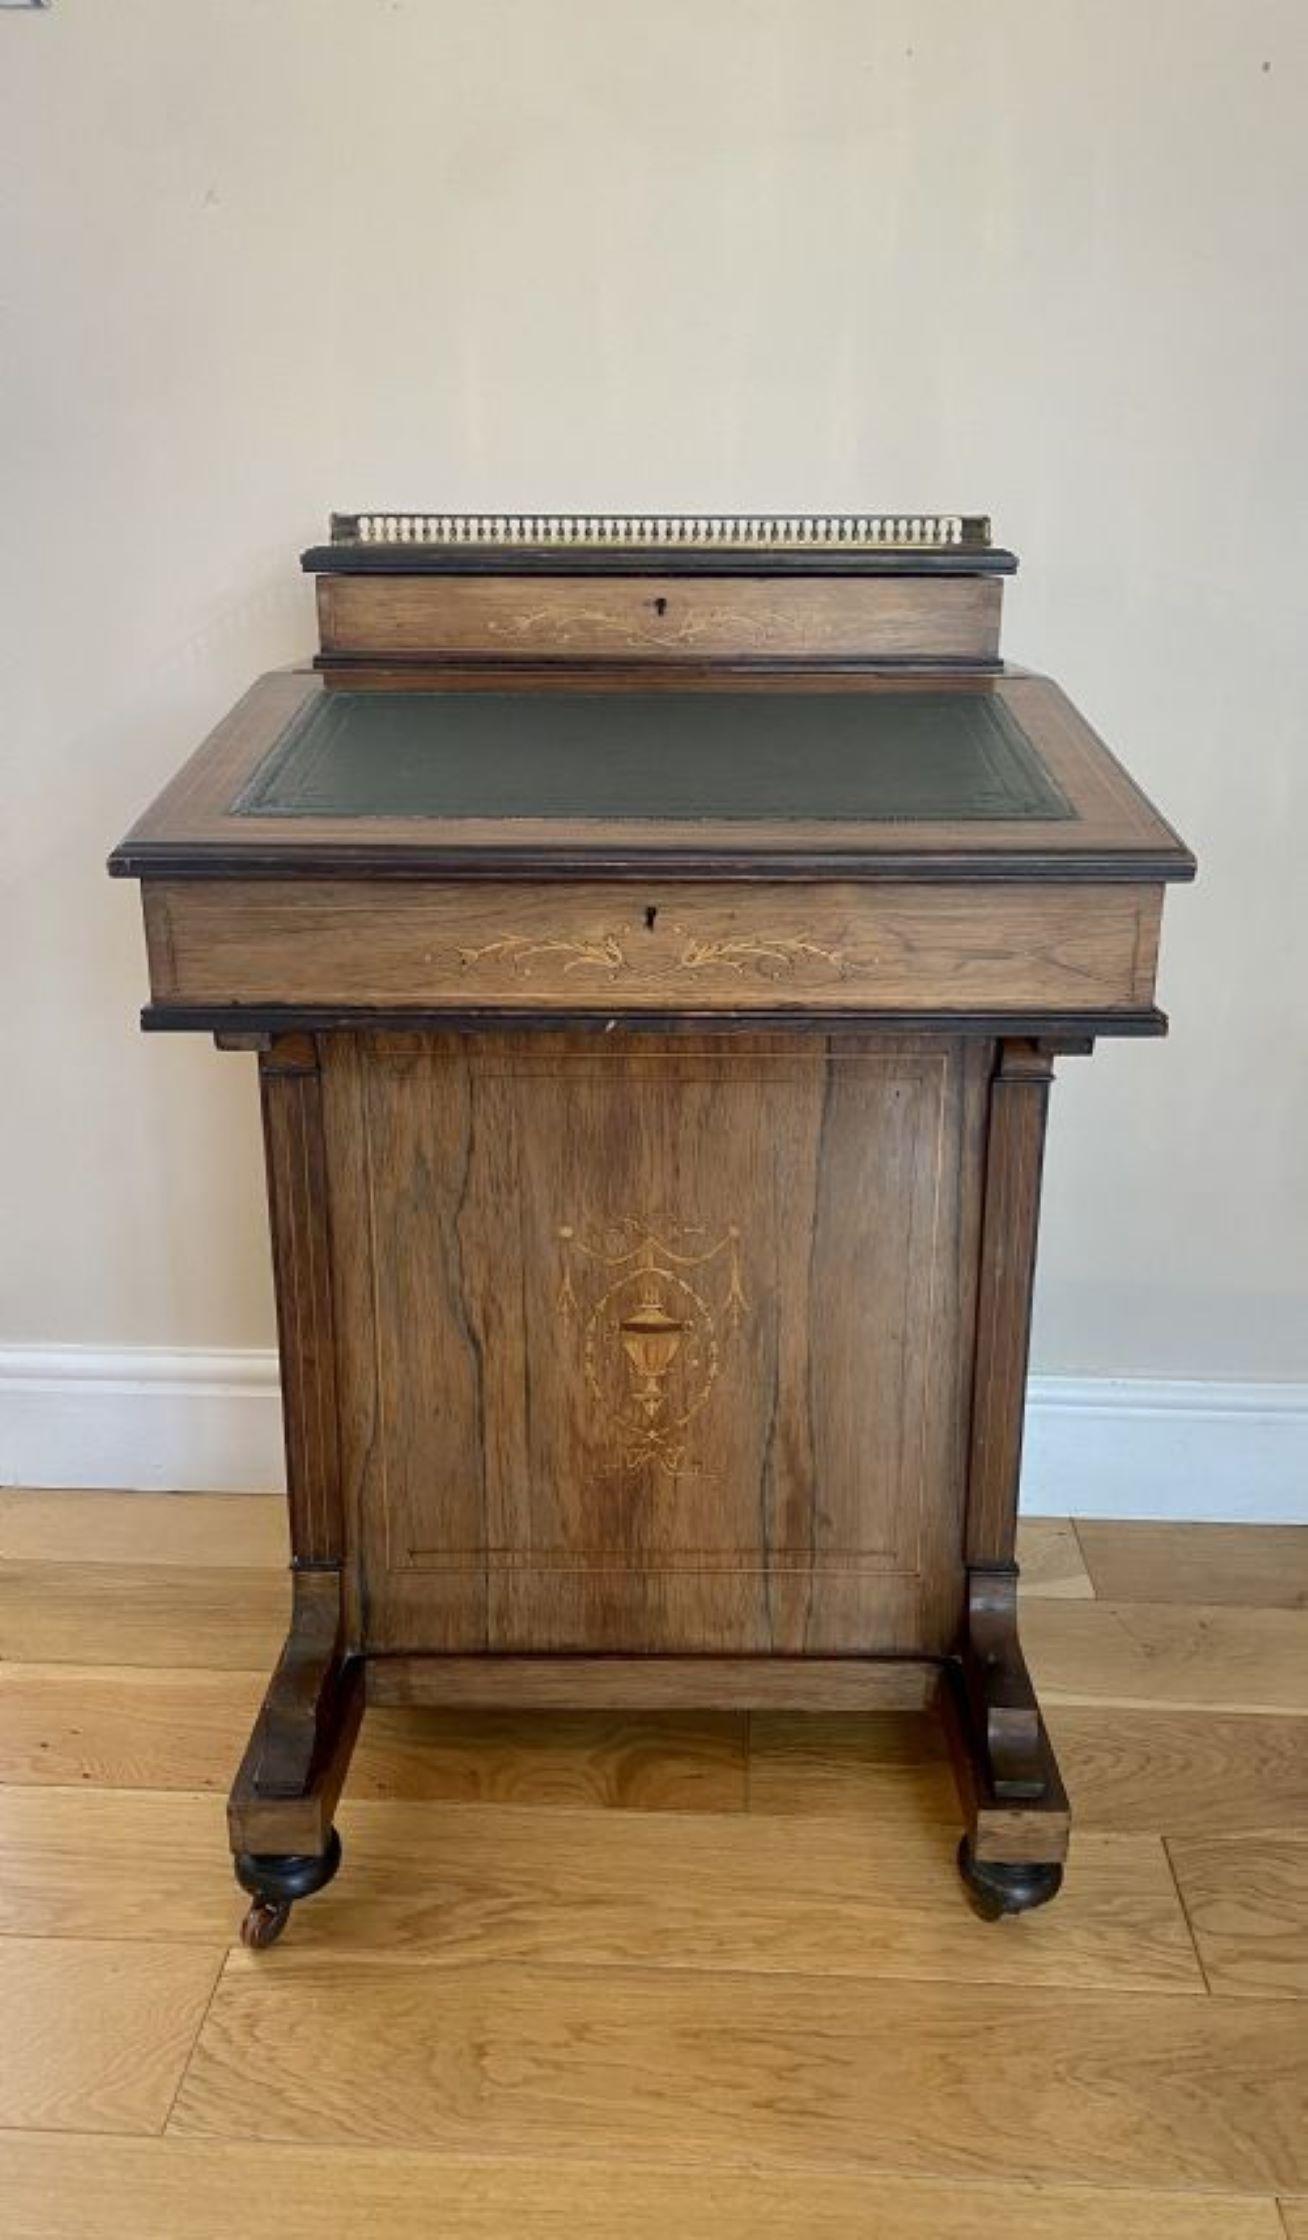 Antique Victorian Quality Inlaid Rosewood Freestanding Davenport Desk For Sale 2